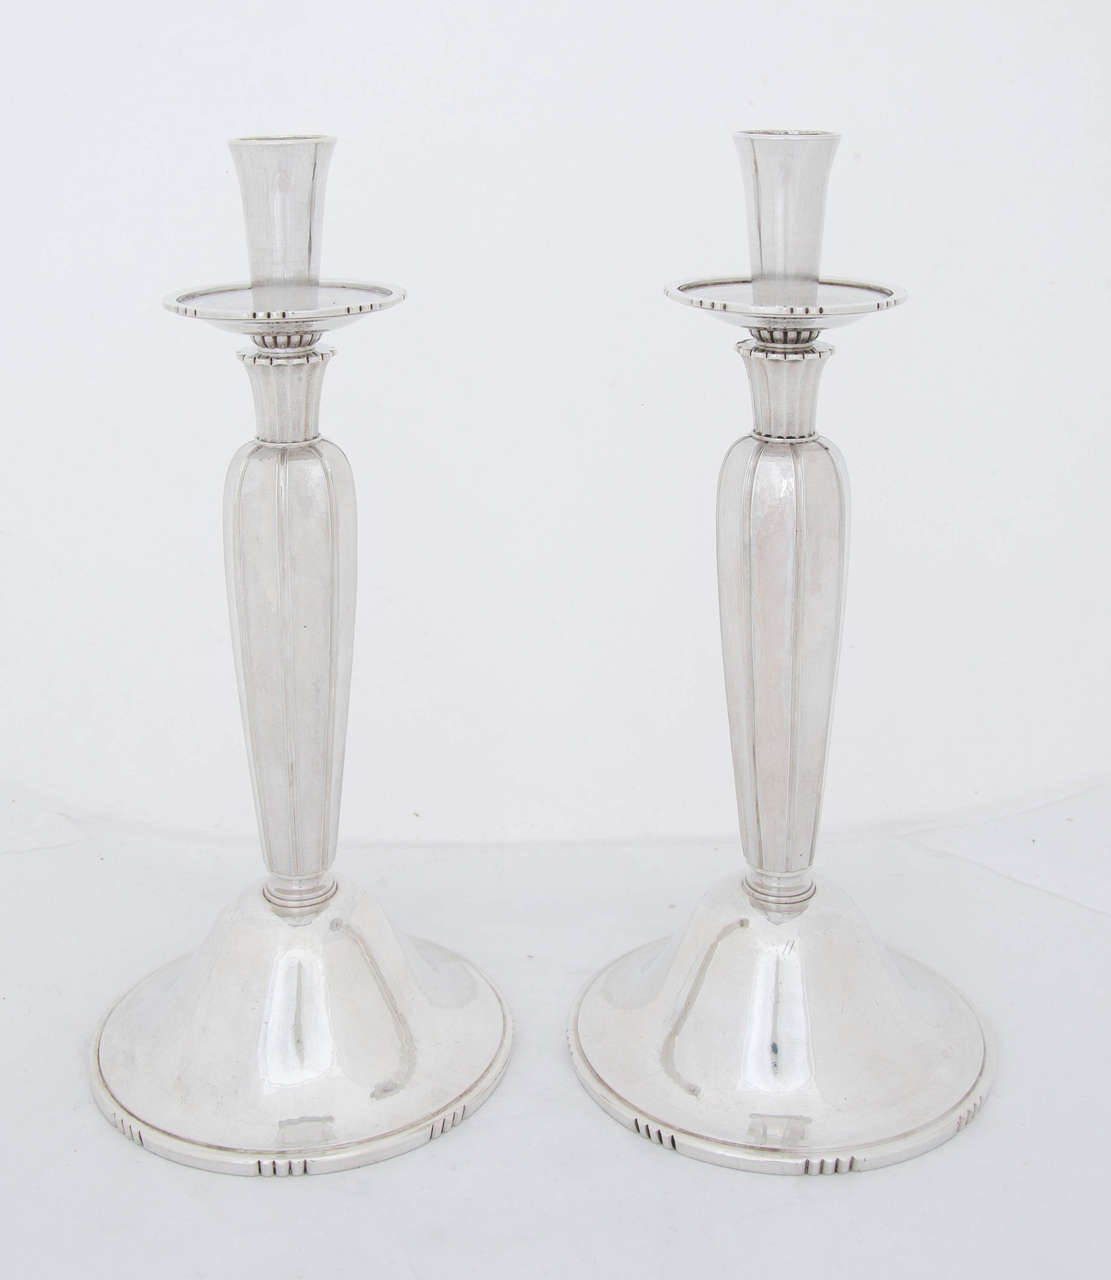 Modernist English Silver Candelabra Suite In Good Condition For Sale In London, GB